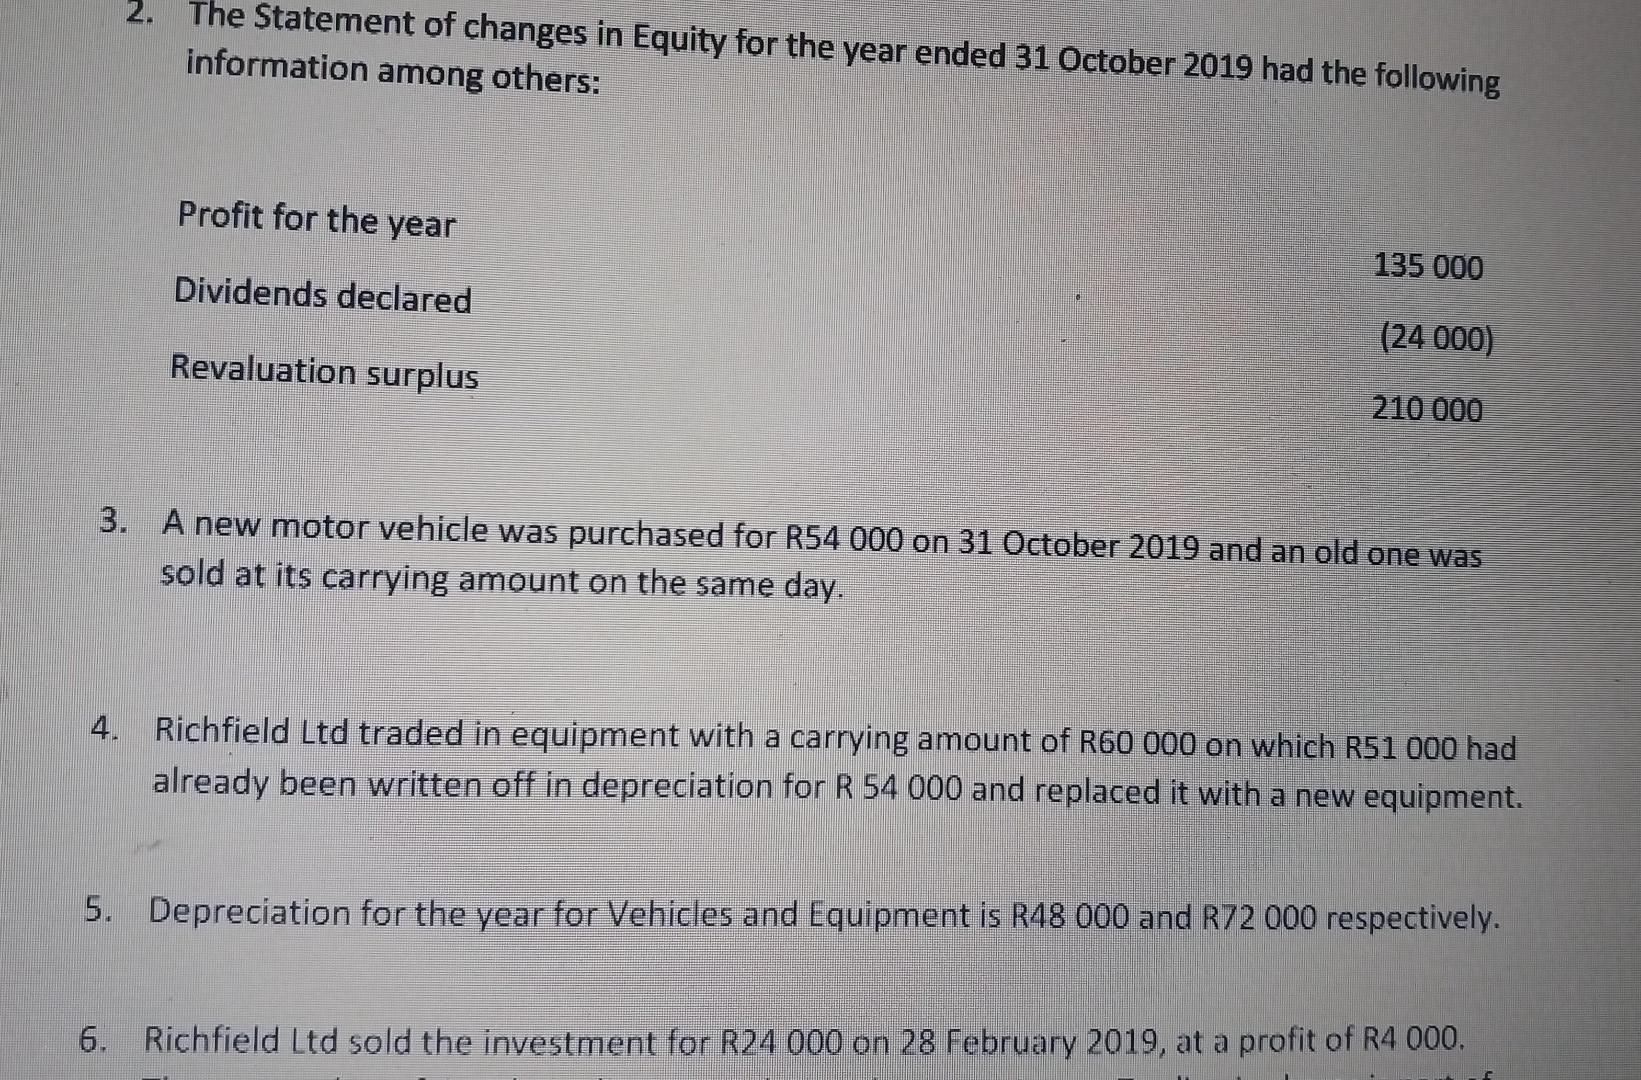 2. The Statement of changes in Equity for the year ended 31 October 2019 had the following information among